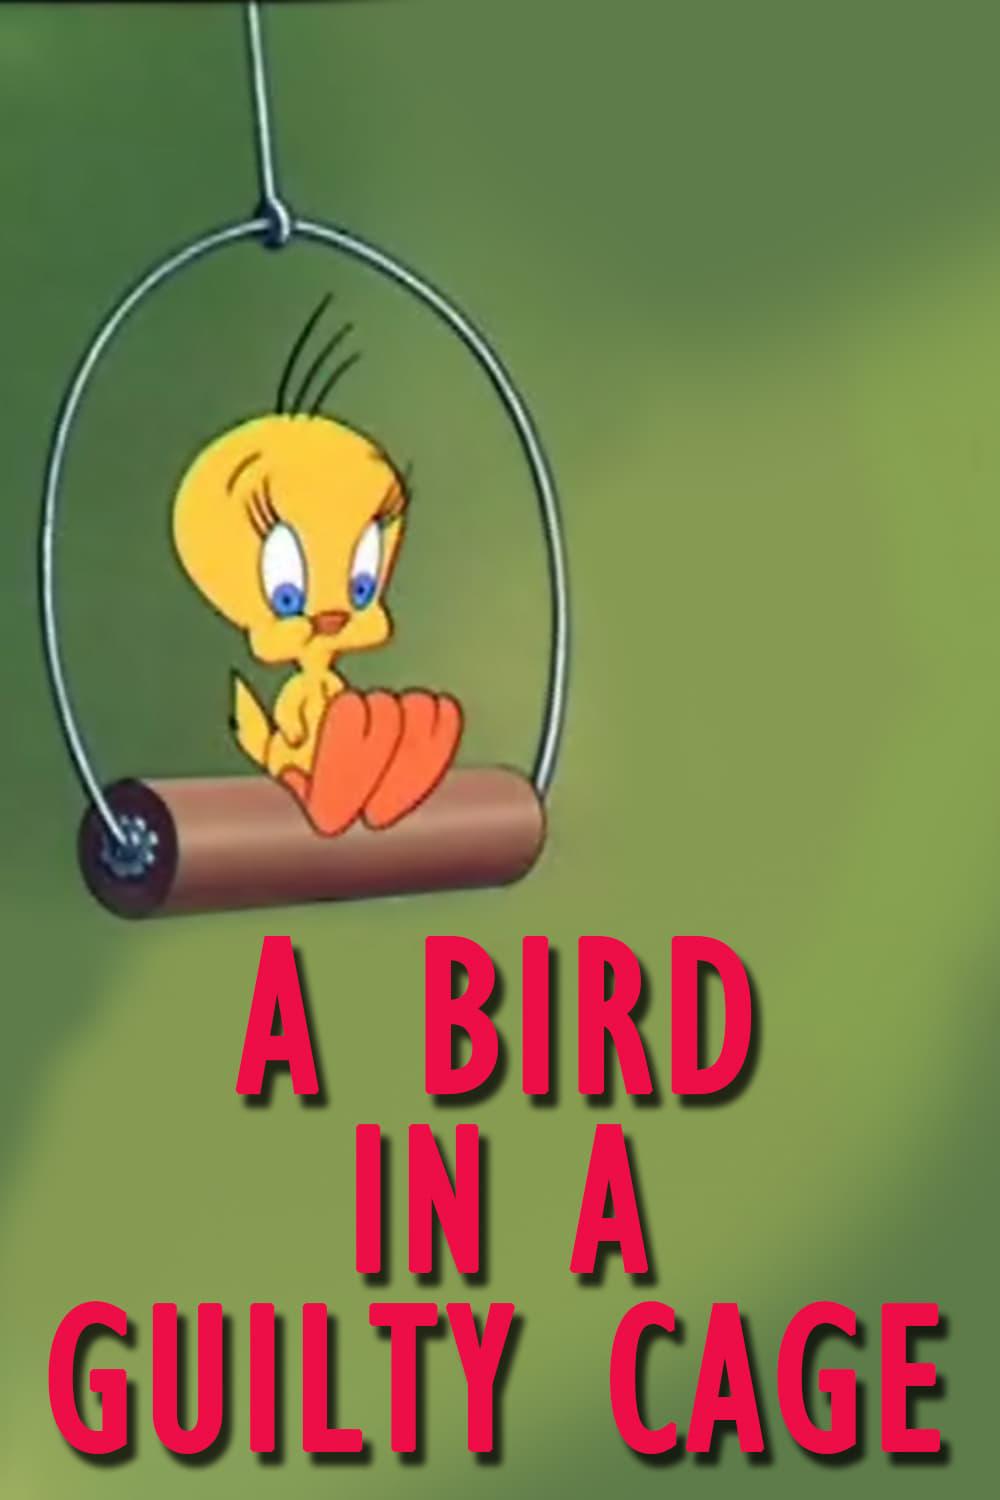 A Bird in a Guilty Cage poster